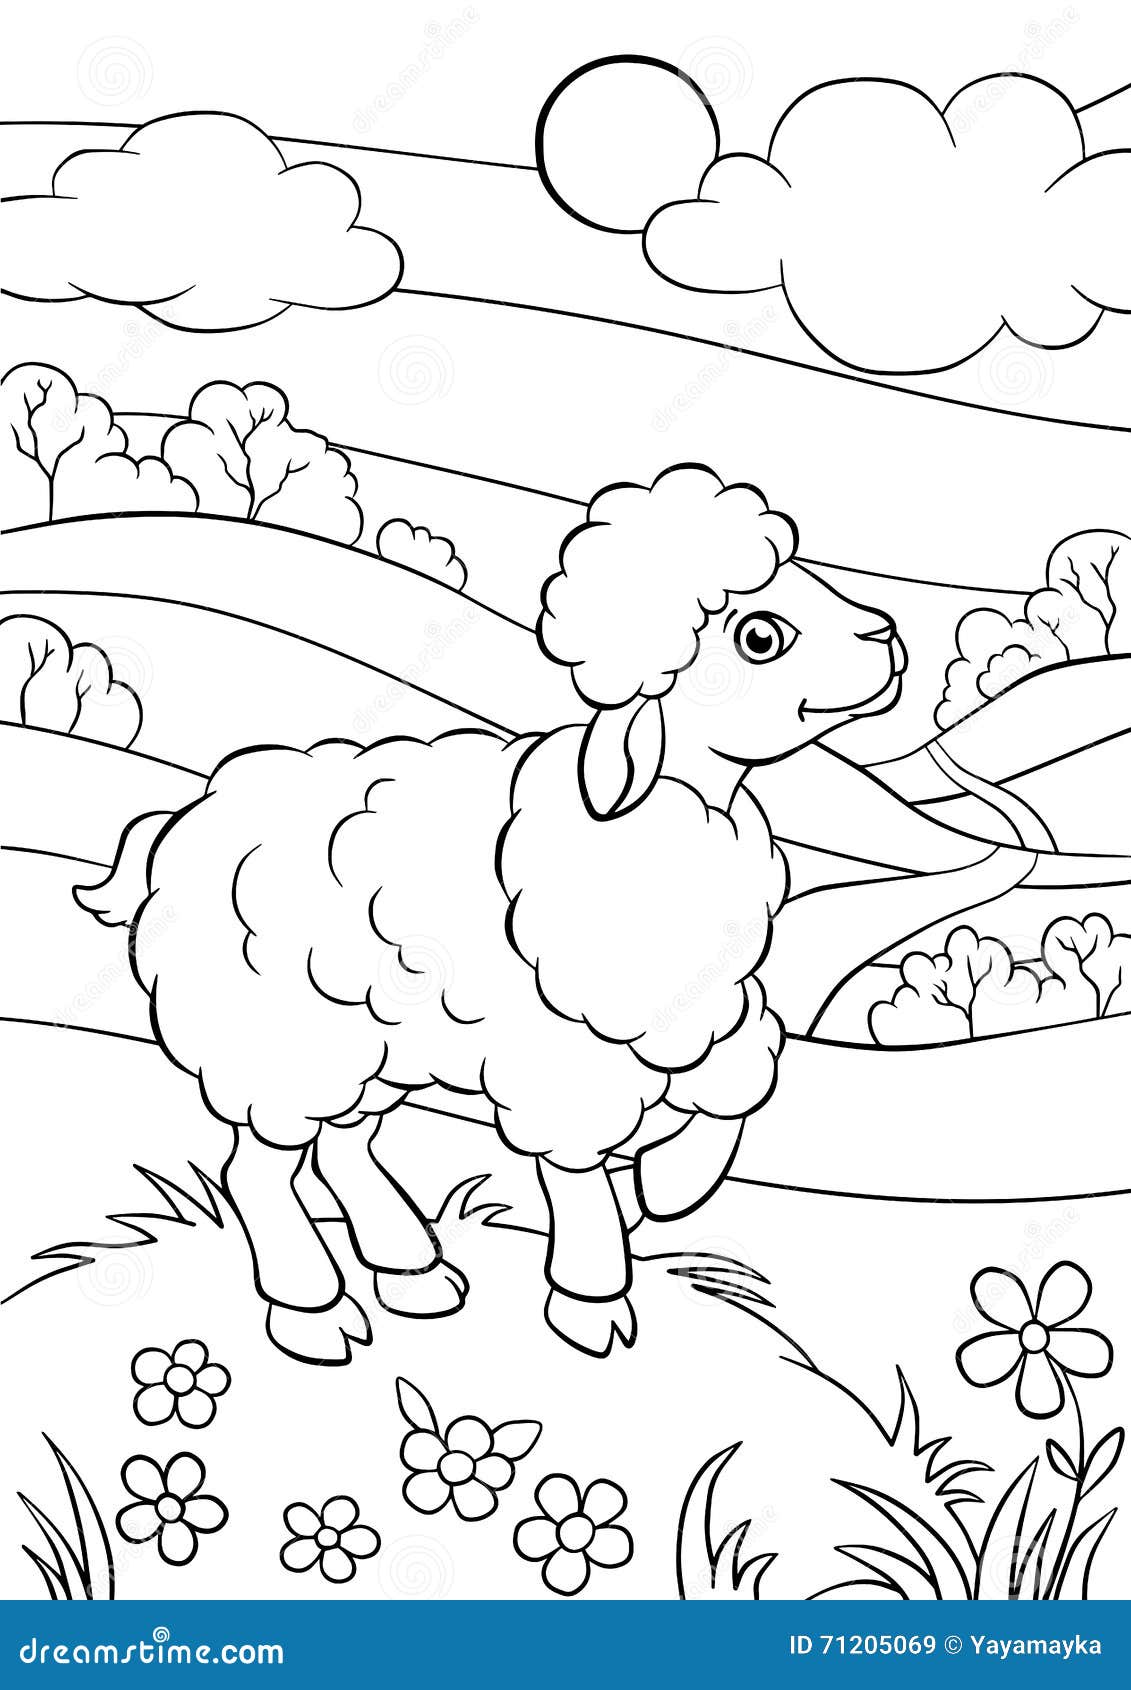 Coloring Pages. Animals. Little Cute Sheep. Stock Vector ...